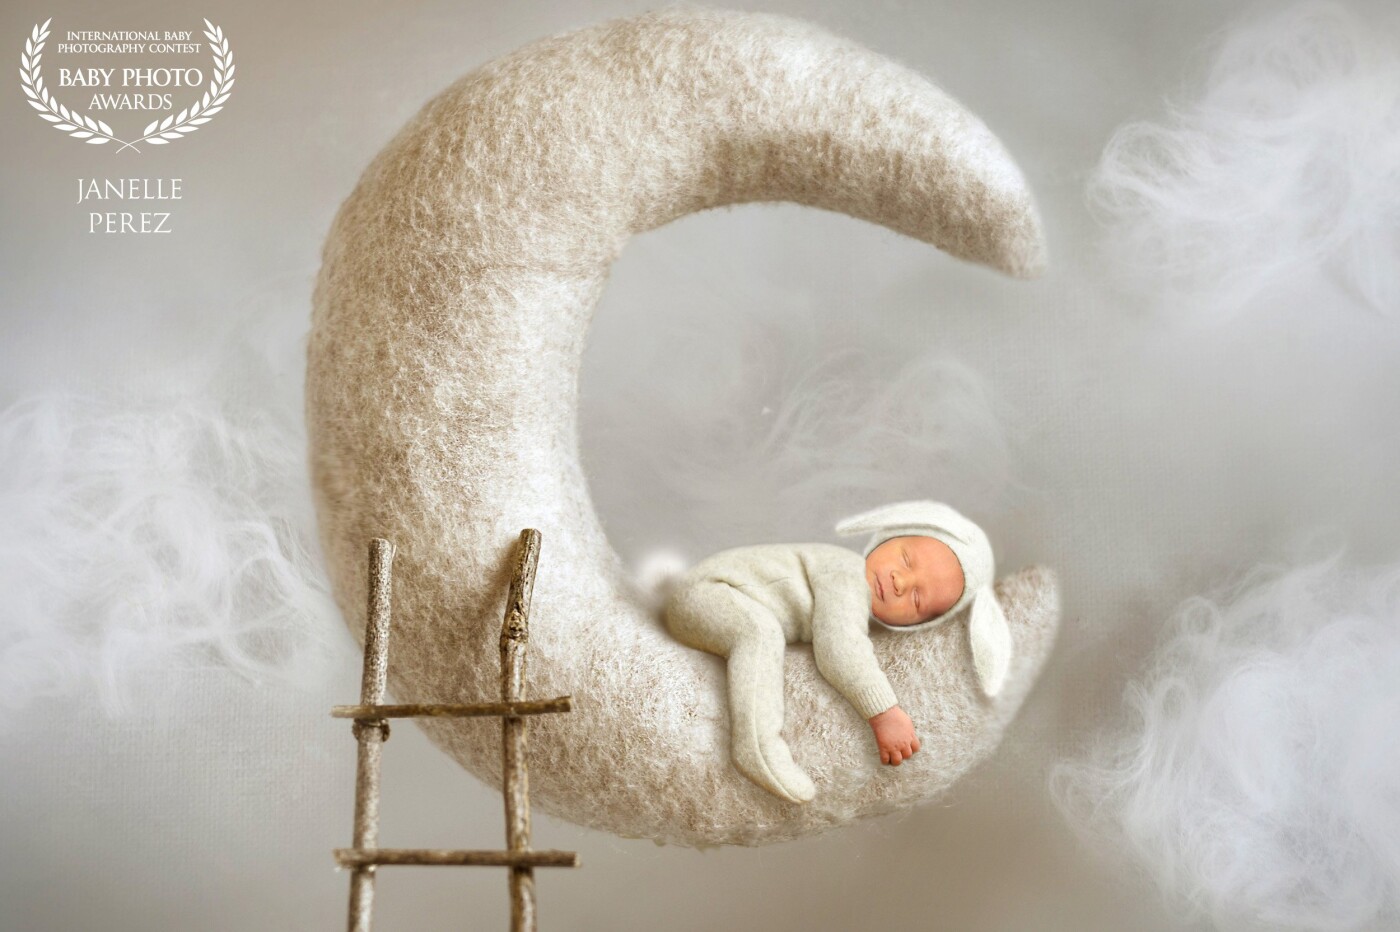 Newborn pictures are some of the most important photos you will take of your child. I always aim to have my photographs capture the innocence of the little one. In this picture, the baby is seen sleeping blissfully on the moon as the clouds swirl by. When I think of a baby's first moments, I envision all the tender memories a parent will want to remember which is what I attempt to capture in my photographs. I know the photos will create an everlasting memory that the parents will cherish forever. 